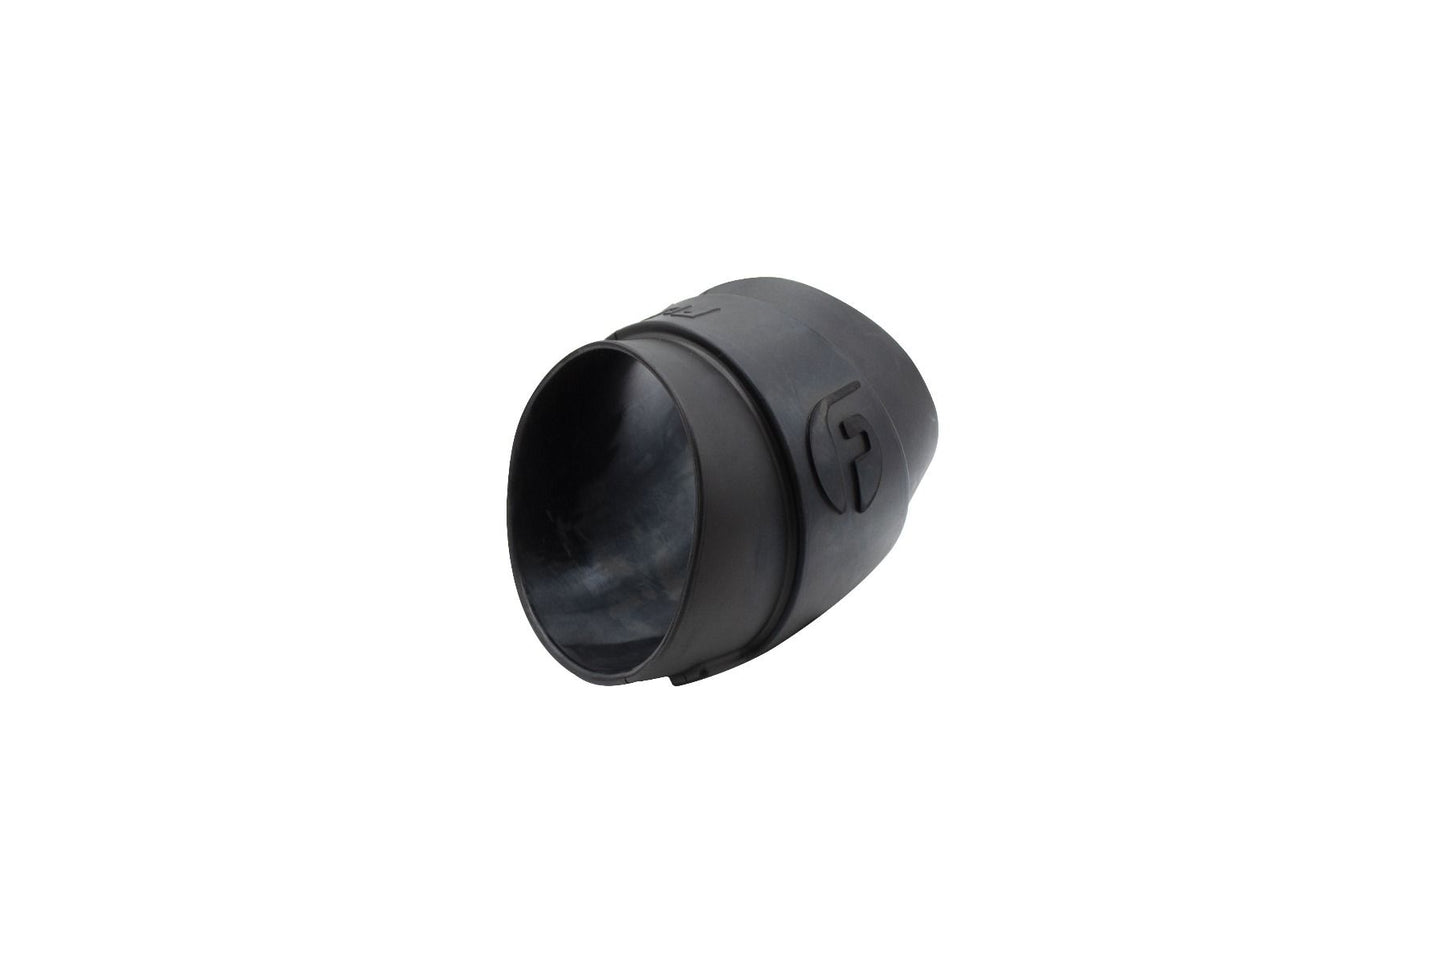 Fleece Molded Rubber Universal Elbow For 5" Intakes